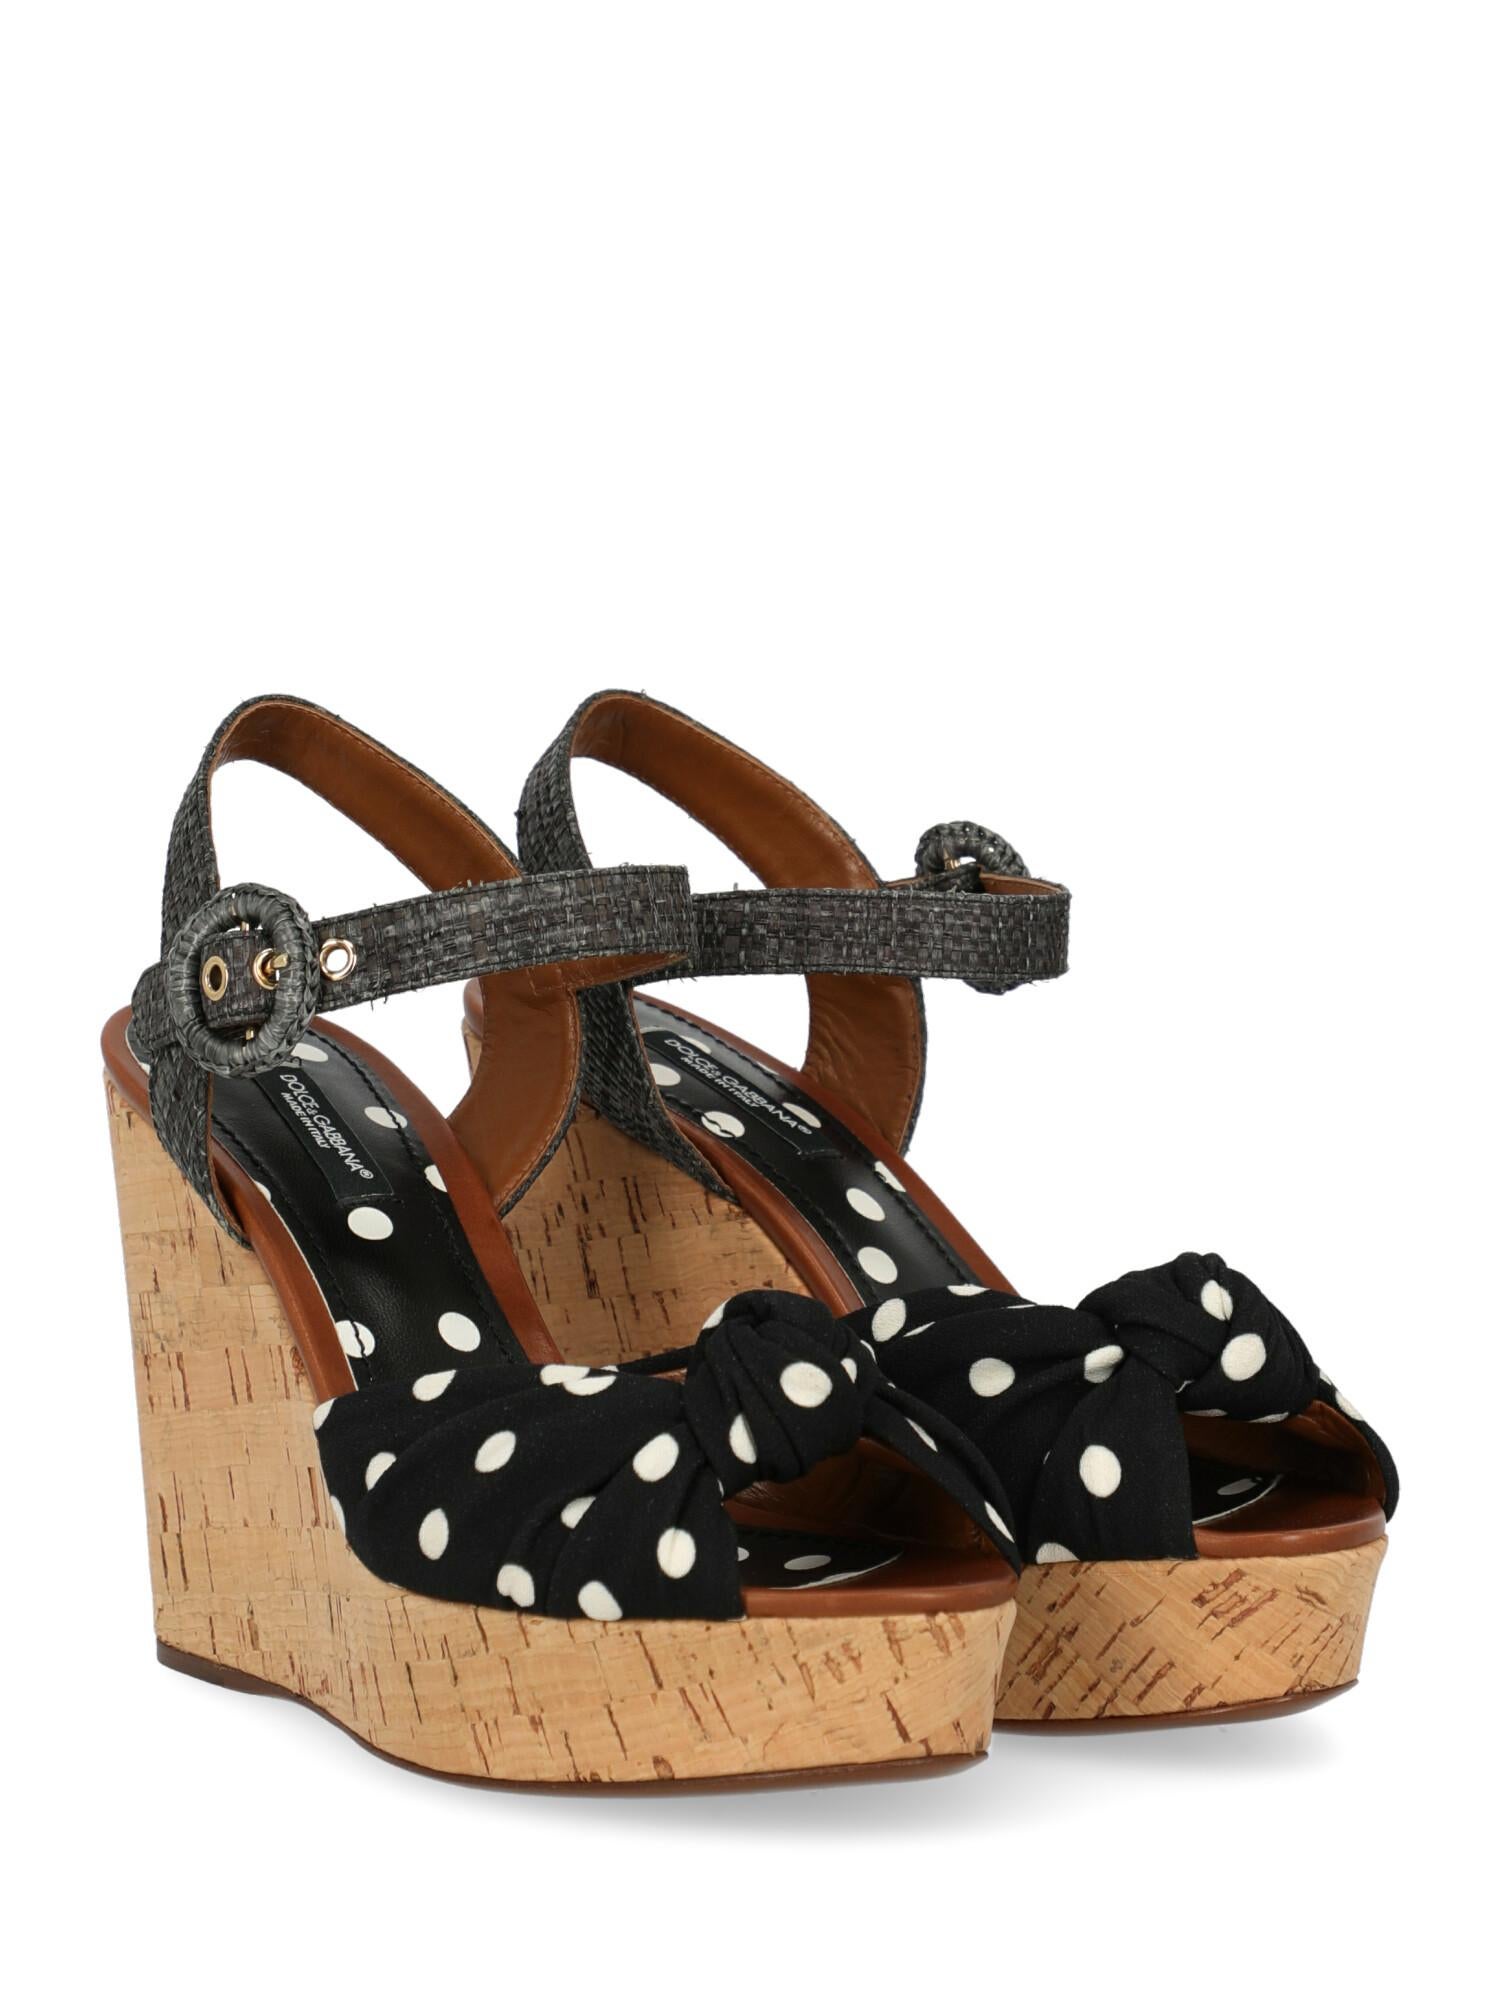 Wedges, fabric, polka dot, ankle strap, gold-tone hardware, leather insole, wedge heel, high heel, woven detail. Product Condition: Like New With Tag. . Dustbag: Yes. Box: Yes
